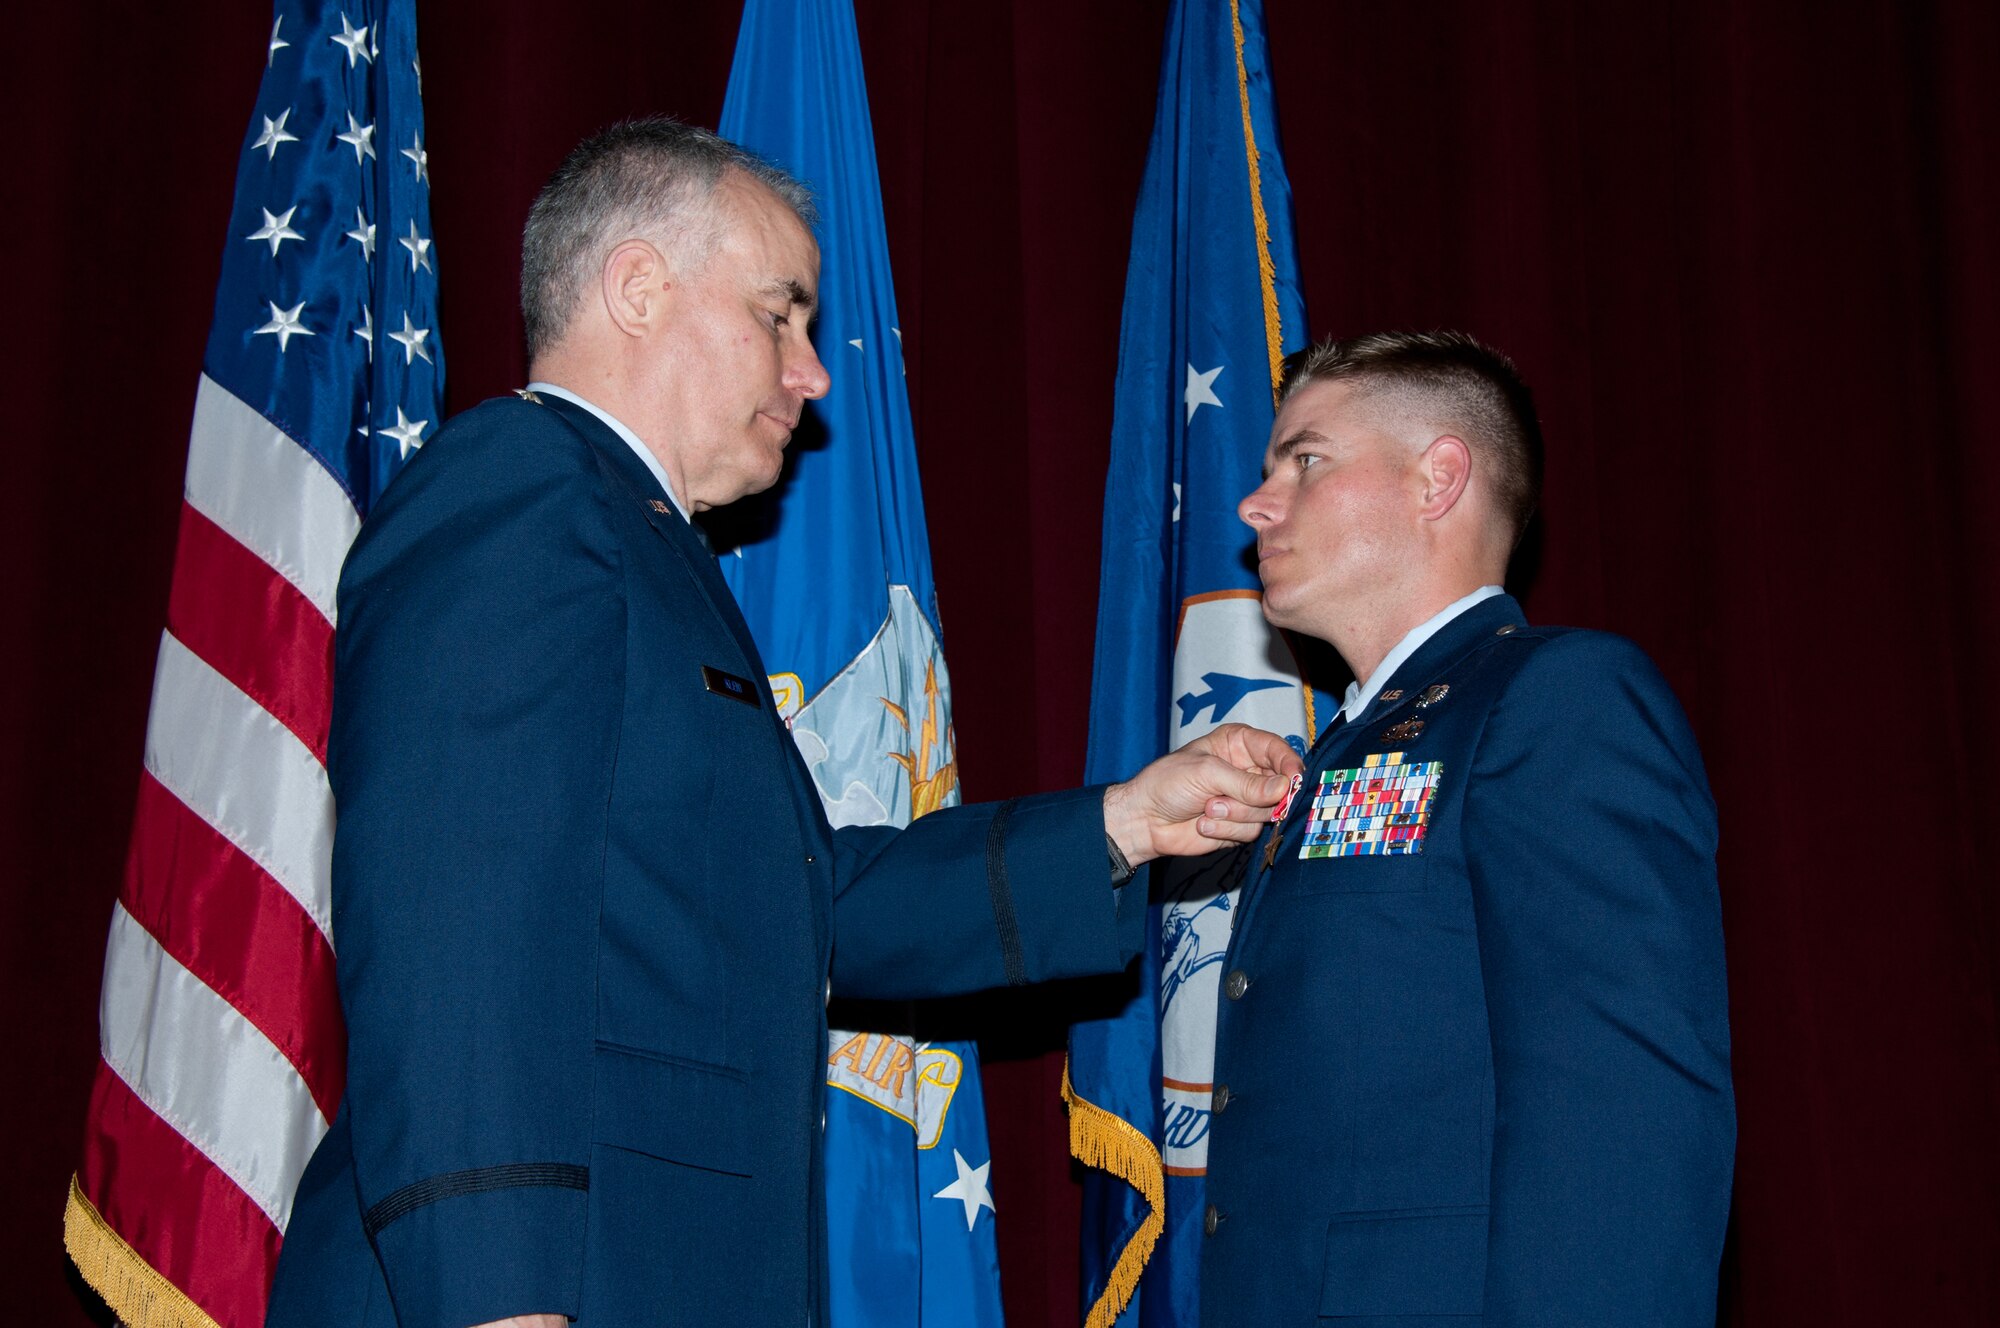 Lt. Col. Kenneth Kleid, acting commander of the Oklahoma Air National Guard's 146th Air Support Operations Squadron, presents the Bronze Star Medal to 2nd Lt. Christopher Schutte of Las Vegas, Nev., an air liaison officer for the 146th ASOS, at Officer Training School March 1. Schutte, who earned his commission as a second lieutenant in the Oklahoma Air National Guard from the Academy of Military Science March 2 , is the first OTS student to receive a Bronze Star Medal during his commissioning training. Schutte earned the medal for actions he took while serving as the enlisted battalion air liaison officer and lead joint terminal attack controller in support of the 1st Battalion, 179th Regiment, 45th Infantry Brigade Combat Team. He and his team engaged in ground combat in the Laghman and Nuristan Provinces, Regional Command-East, Afghanistan, during Operation Enduring Freedom from July 13 to Dec. 12, 2011. (Air Force photo/Melanie Rodgers Cox)